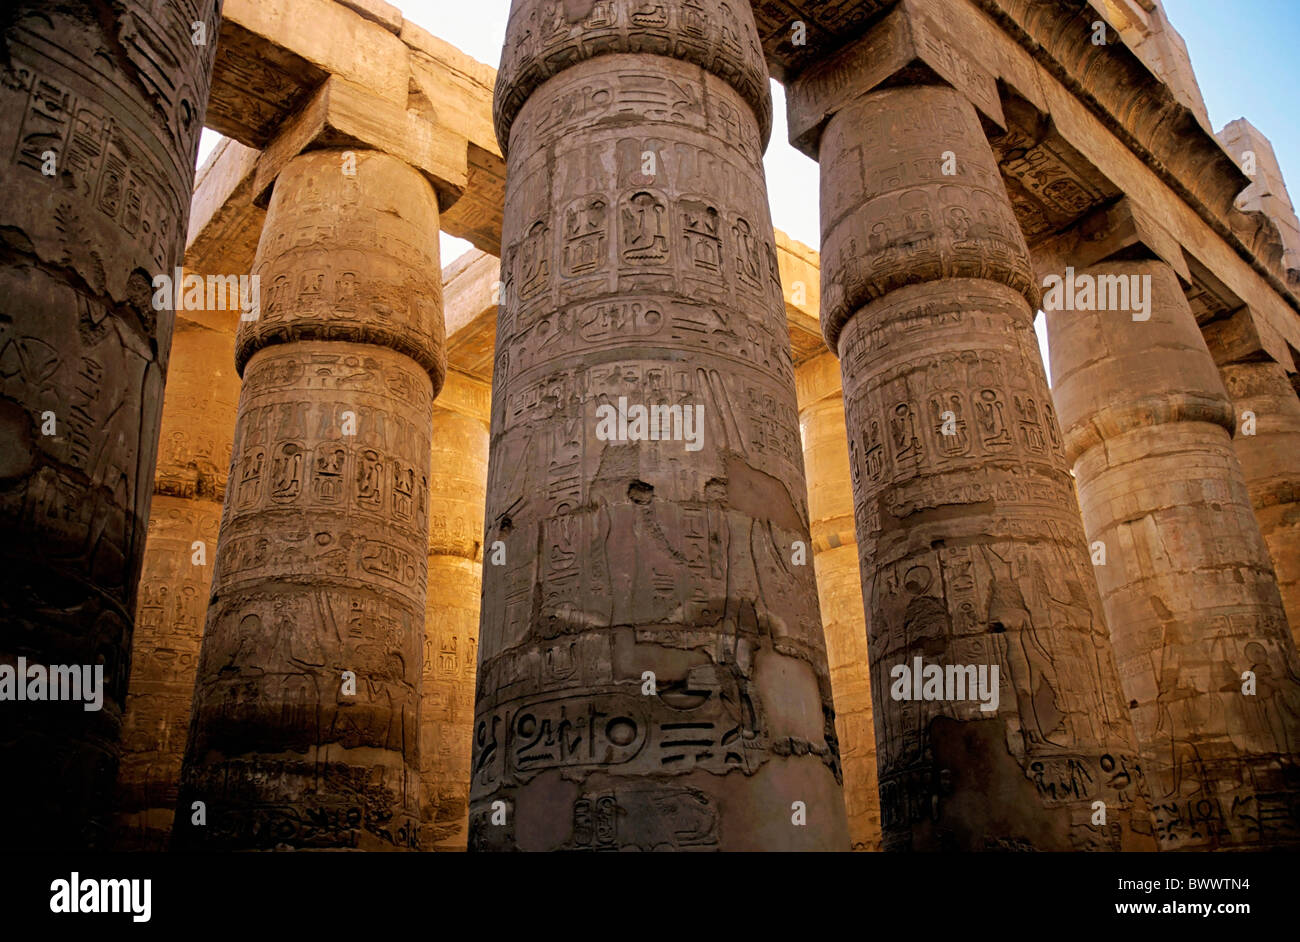 Colonnade in the ancient Karnak Temple Complex at Luxor, Egypt. Stock Photo